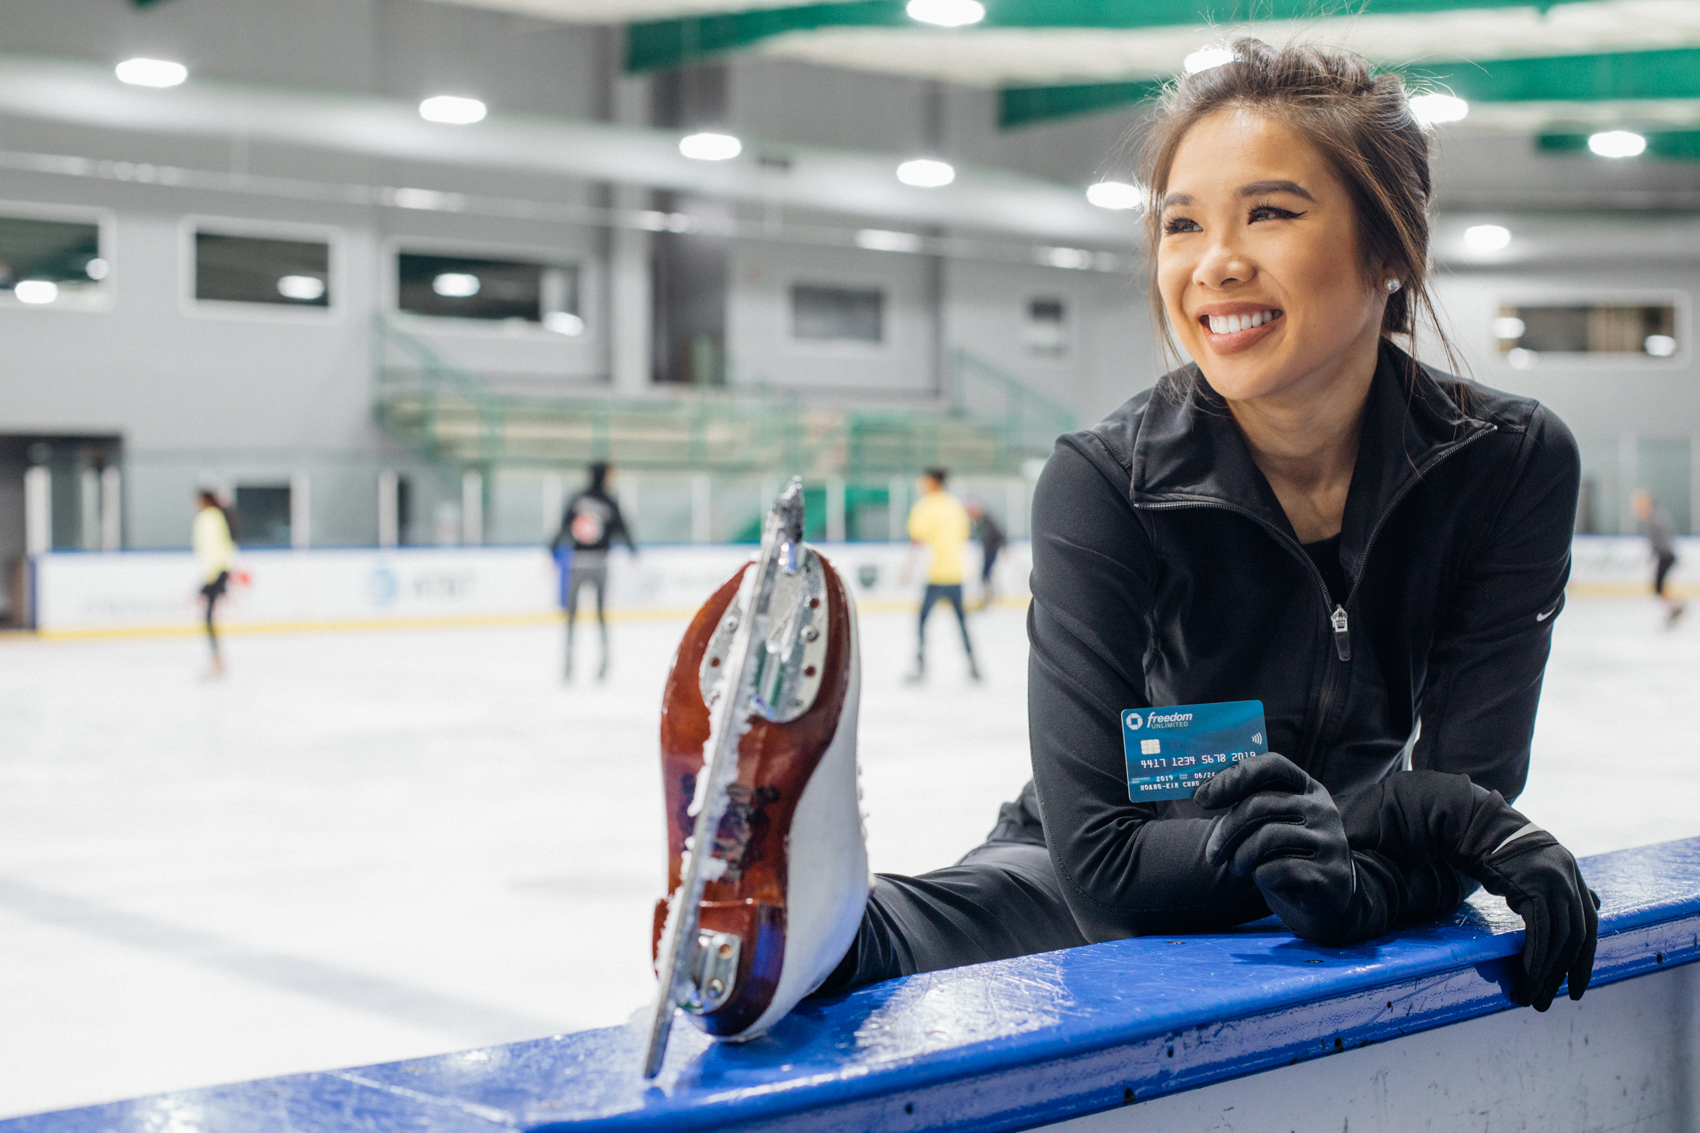 Blogger Hoang-Kim pays for ice skating time with her Chase Freedom Unlimited card